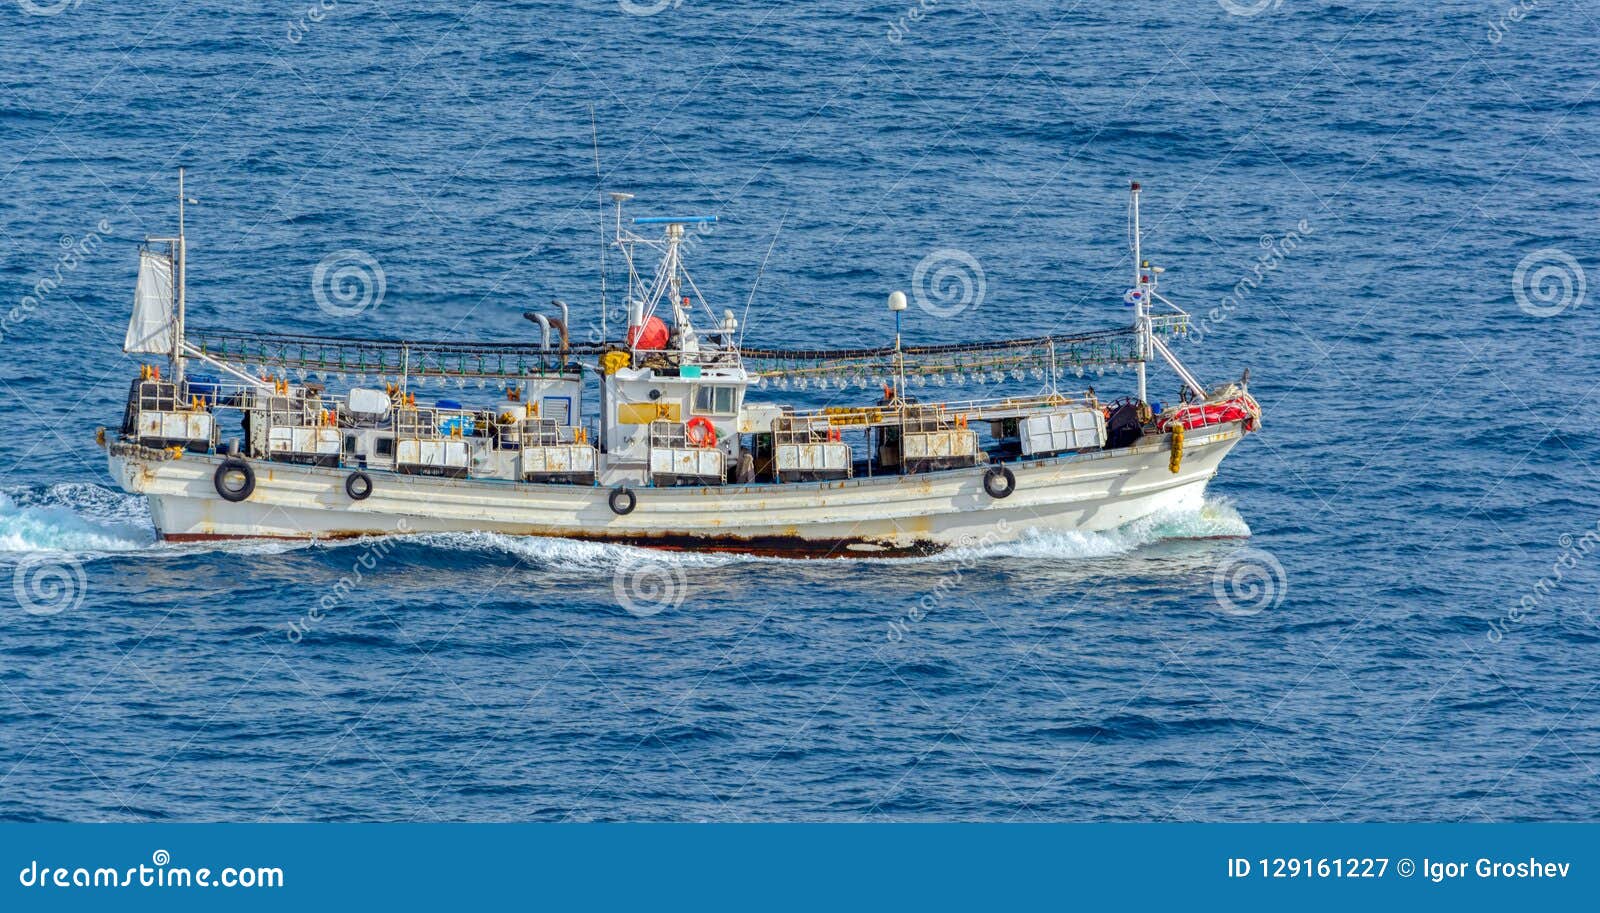 Squid fishing light boat stock image. Image of harbour - 129161227